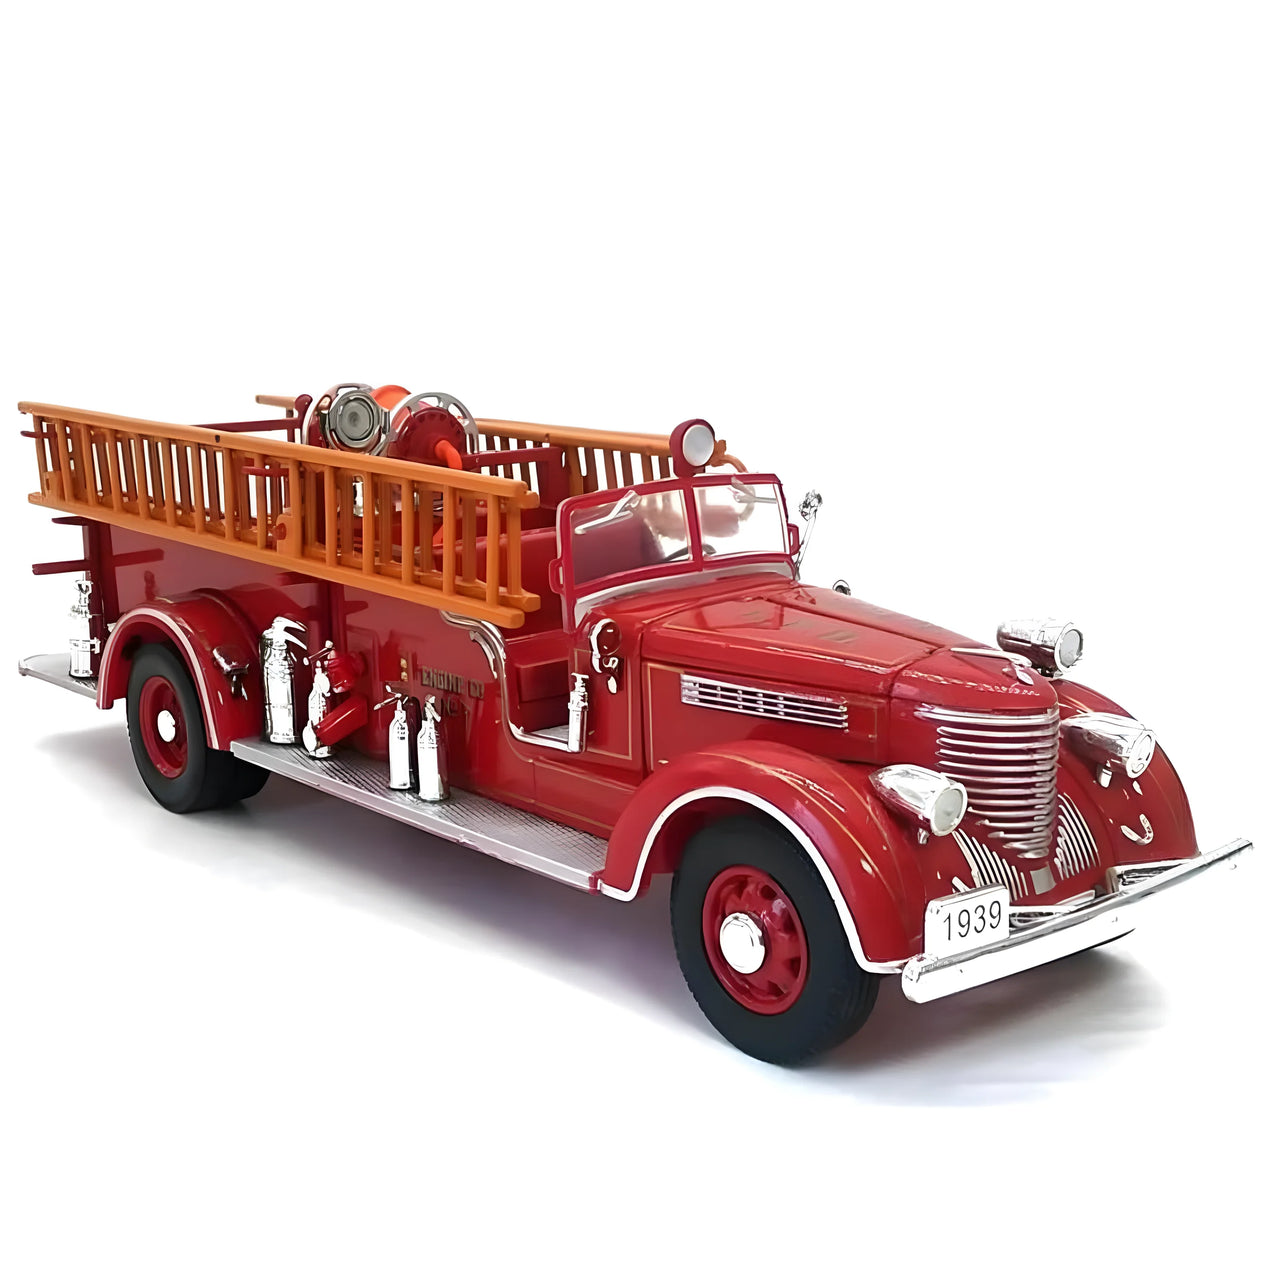 32400 Packard Fire Truck 1939 Scale 1:32 (Discontinued Model)